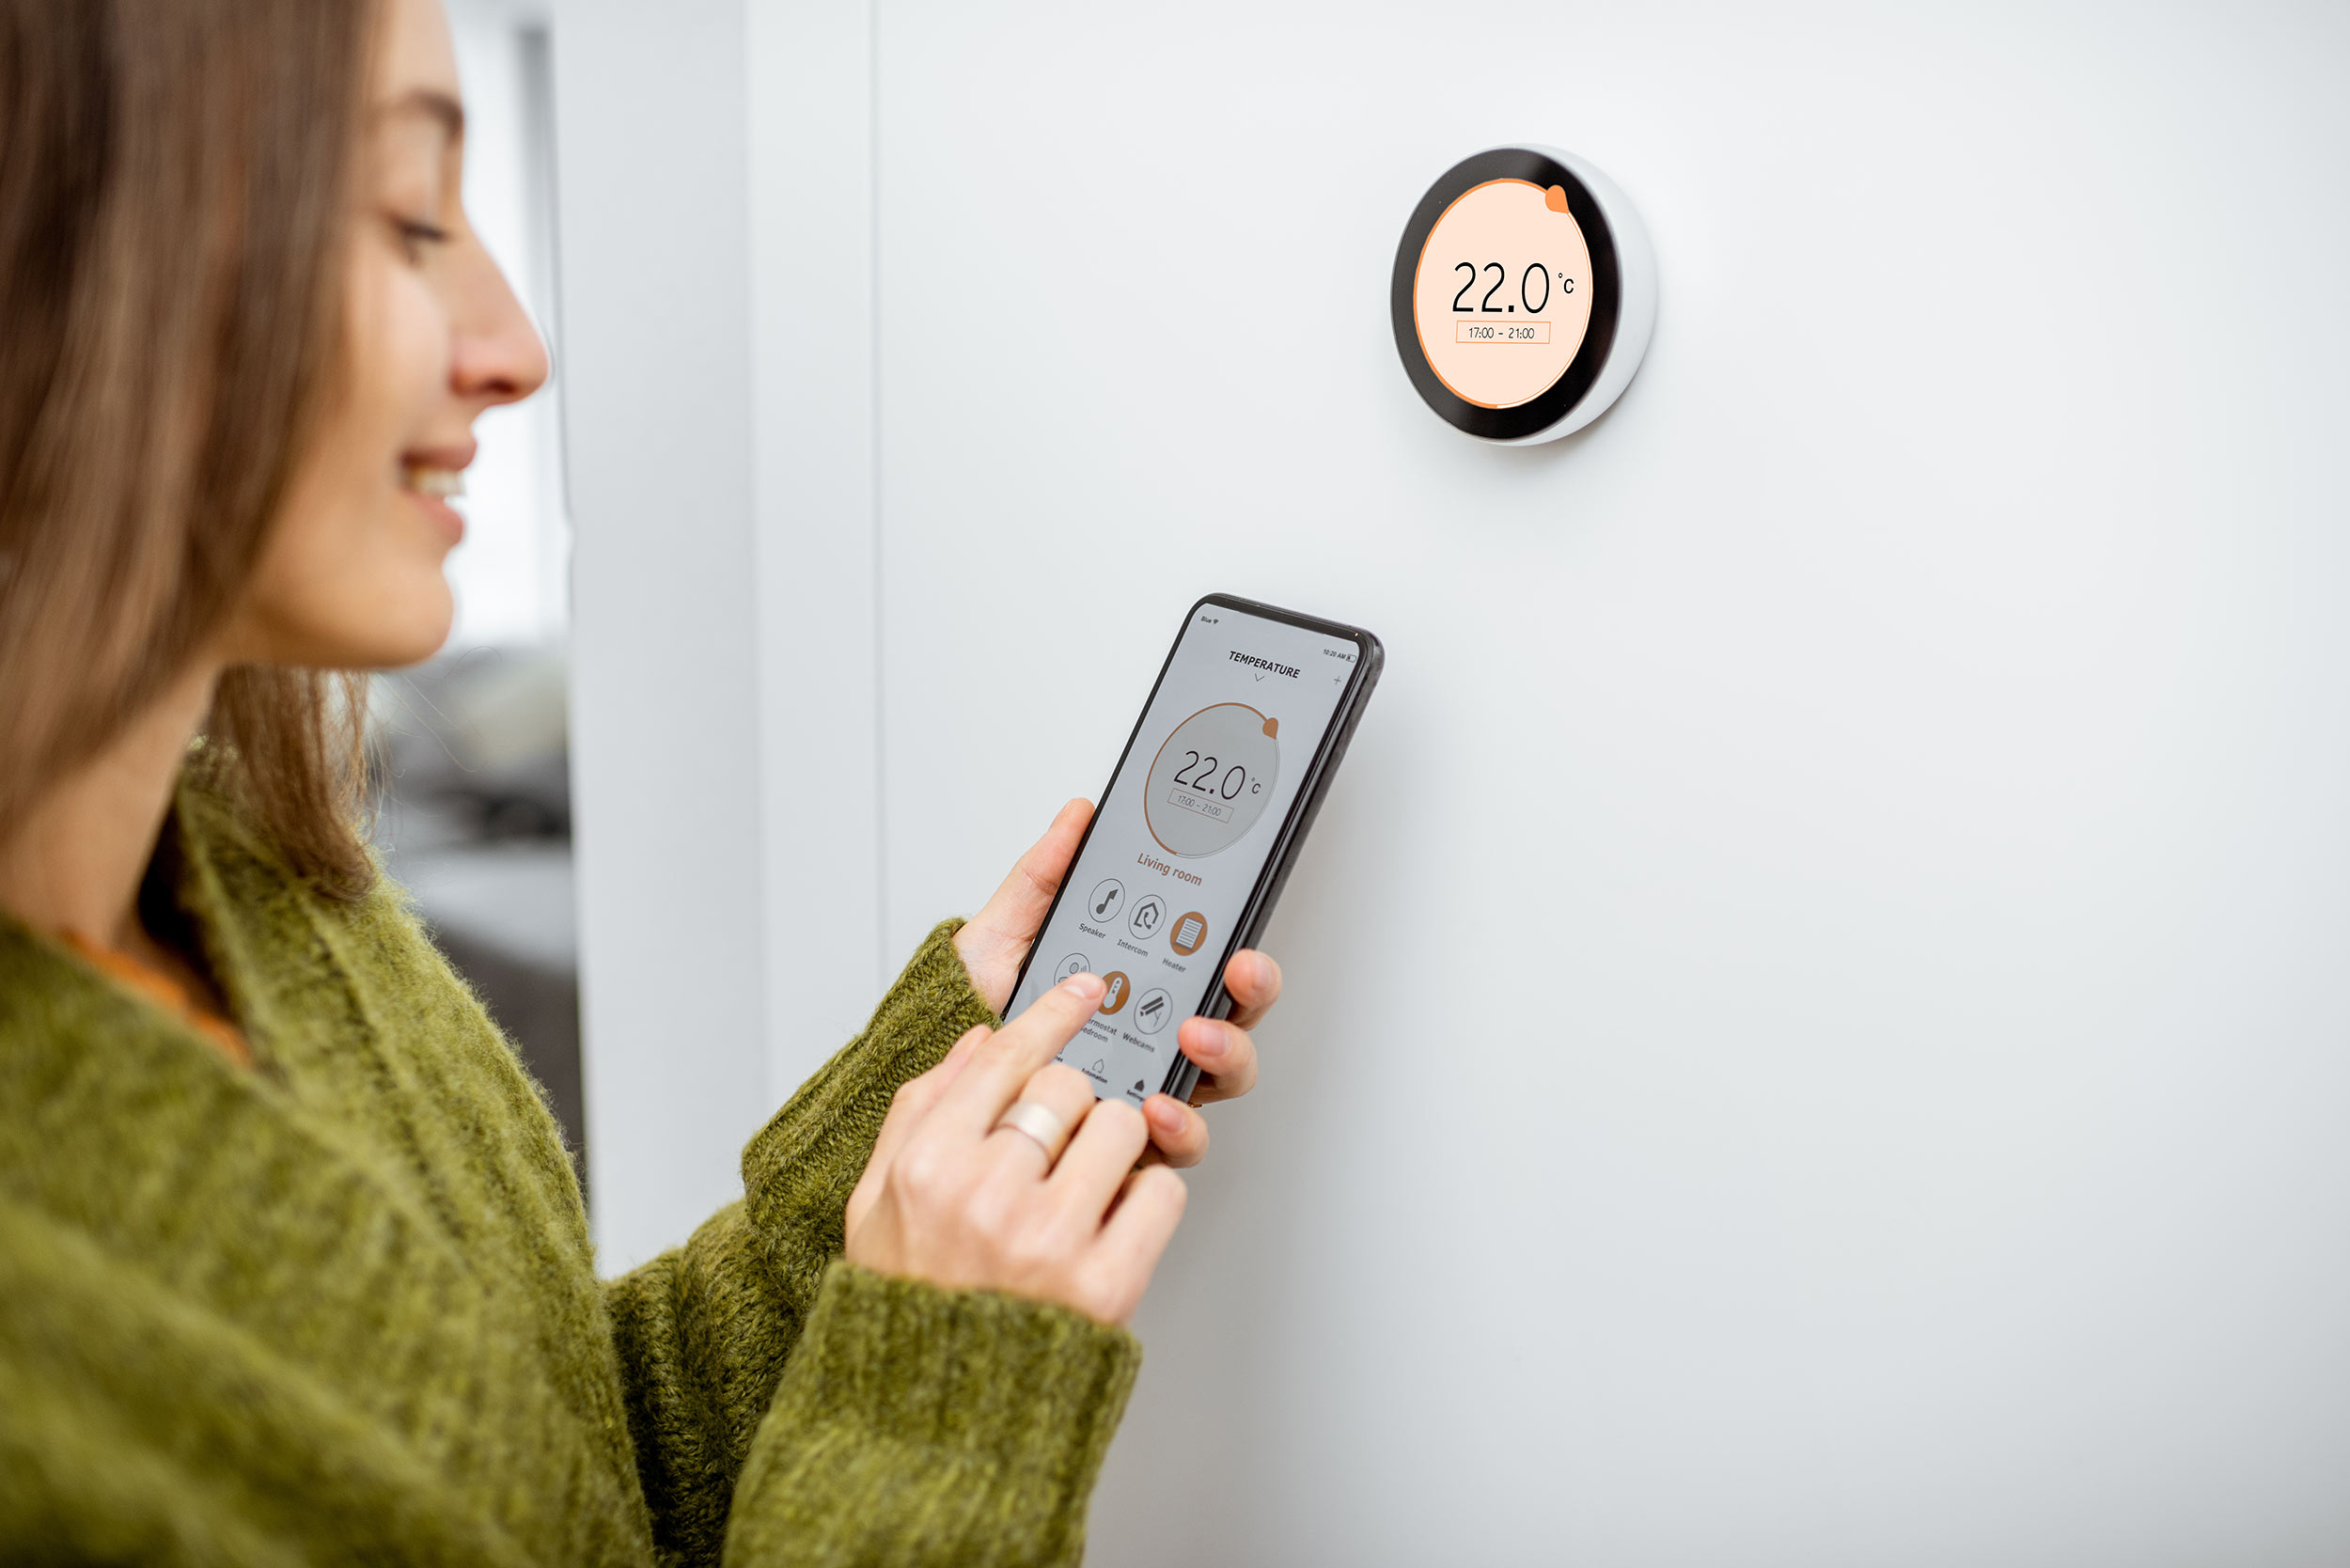 Smart thermostat controlled with mobile phone app